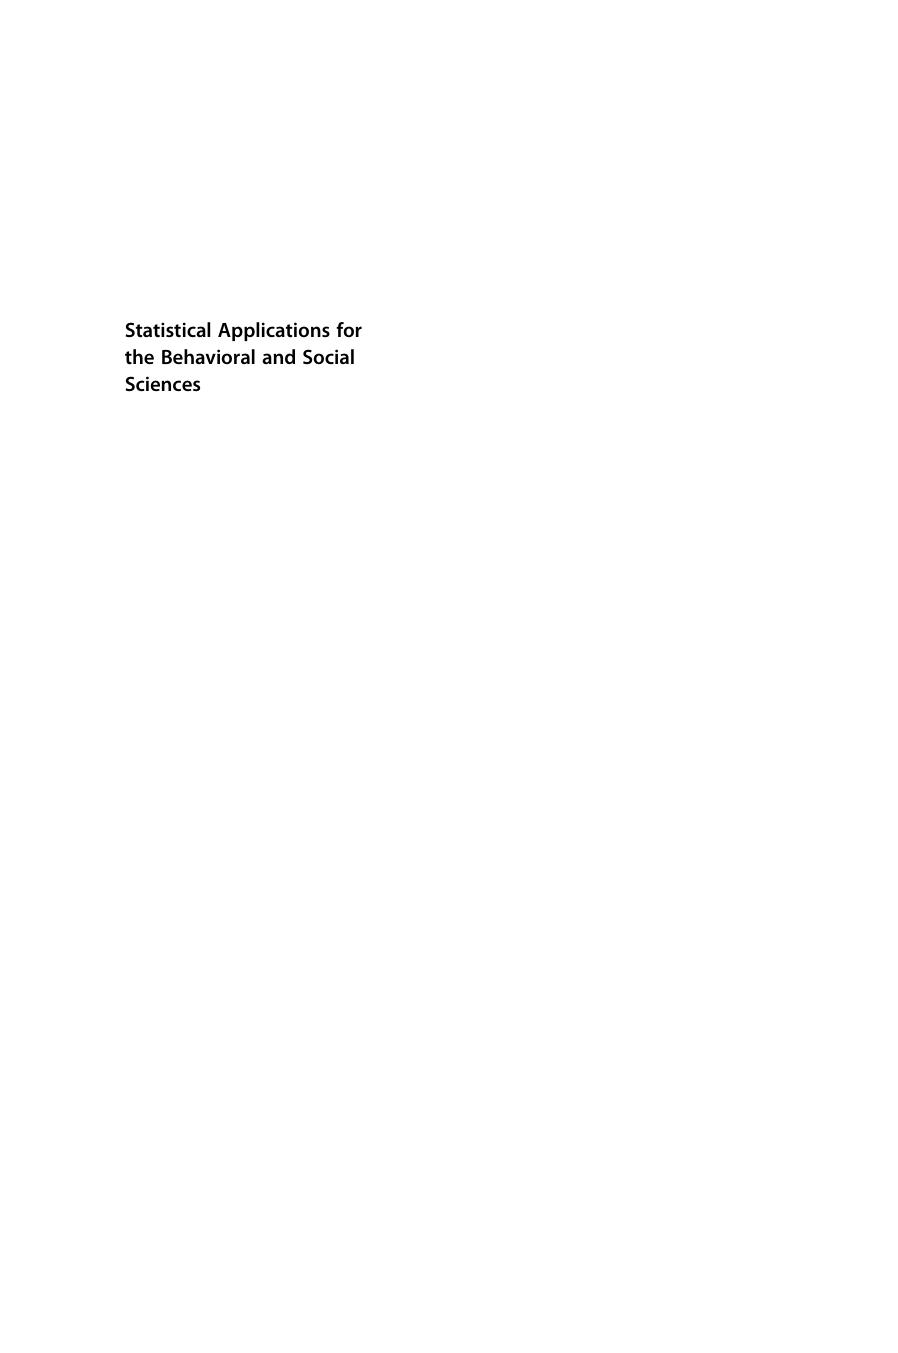 48 Statistical Applications for the Behavioral and Social Sciences, 2nd edition 2017